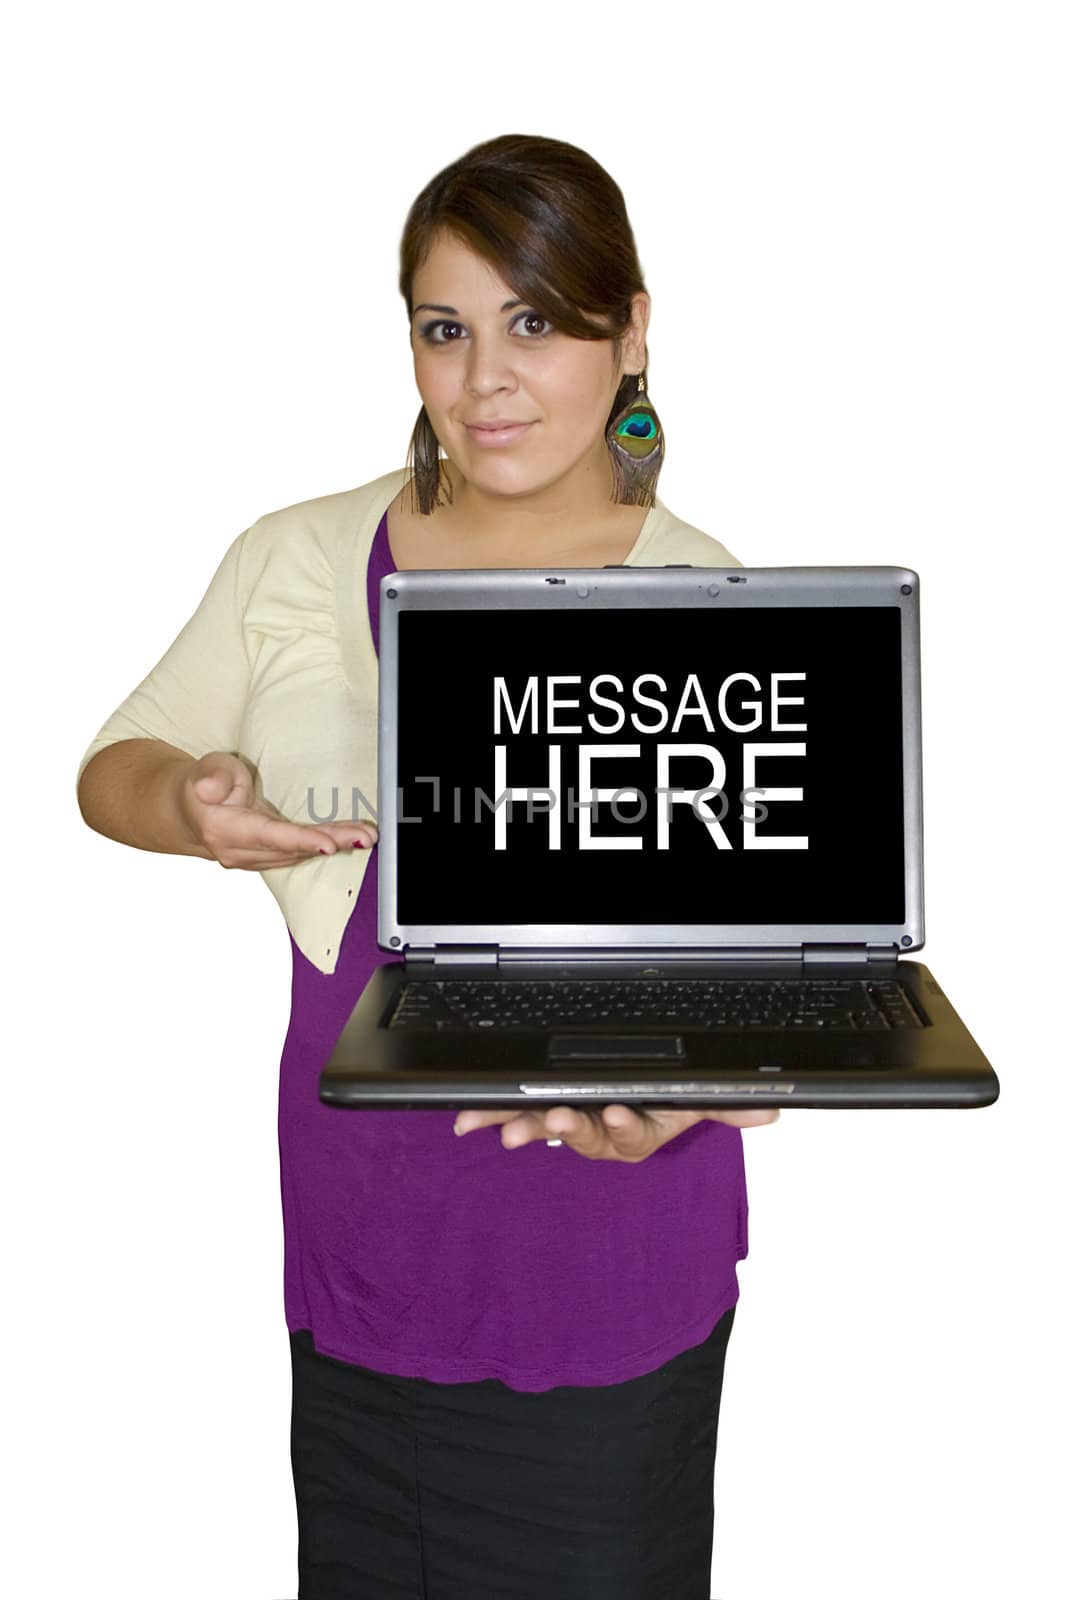 A beautiful young model presenting something on a laptop.  Clipping paths are included for the girl as well as the screen to insert your own image.